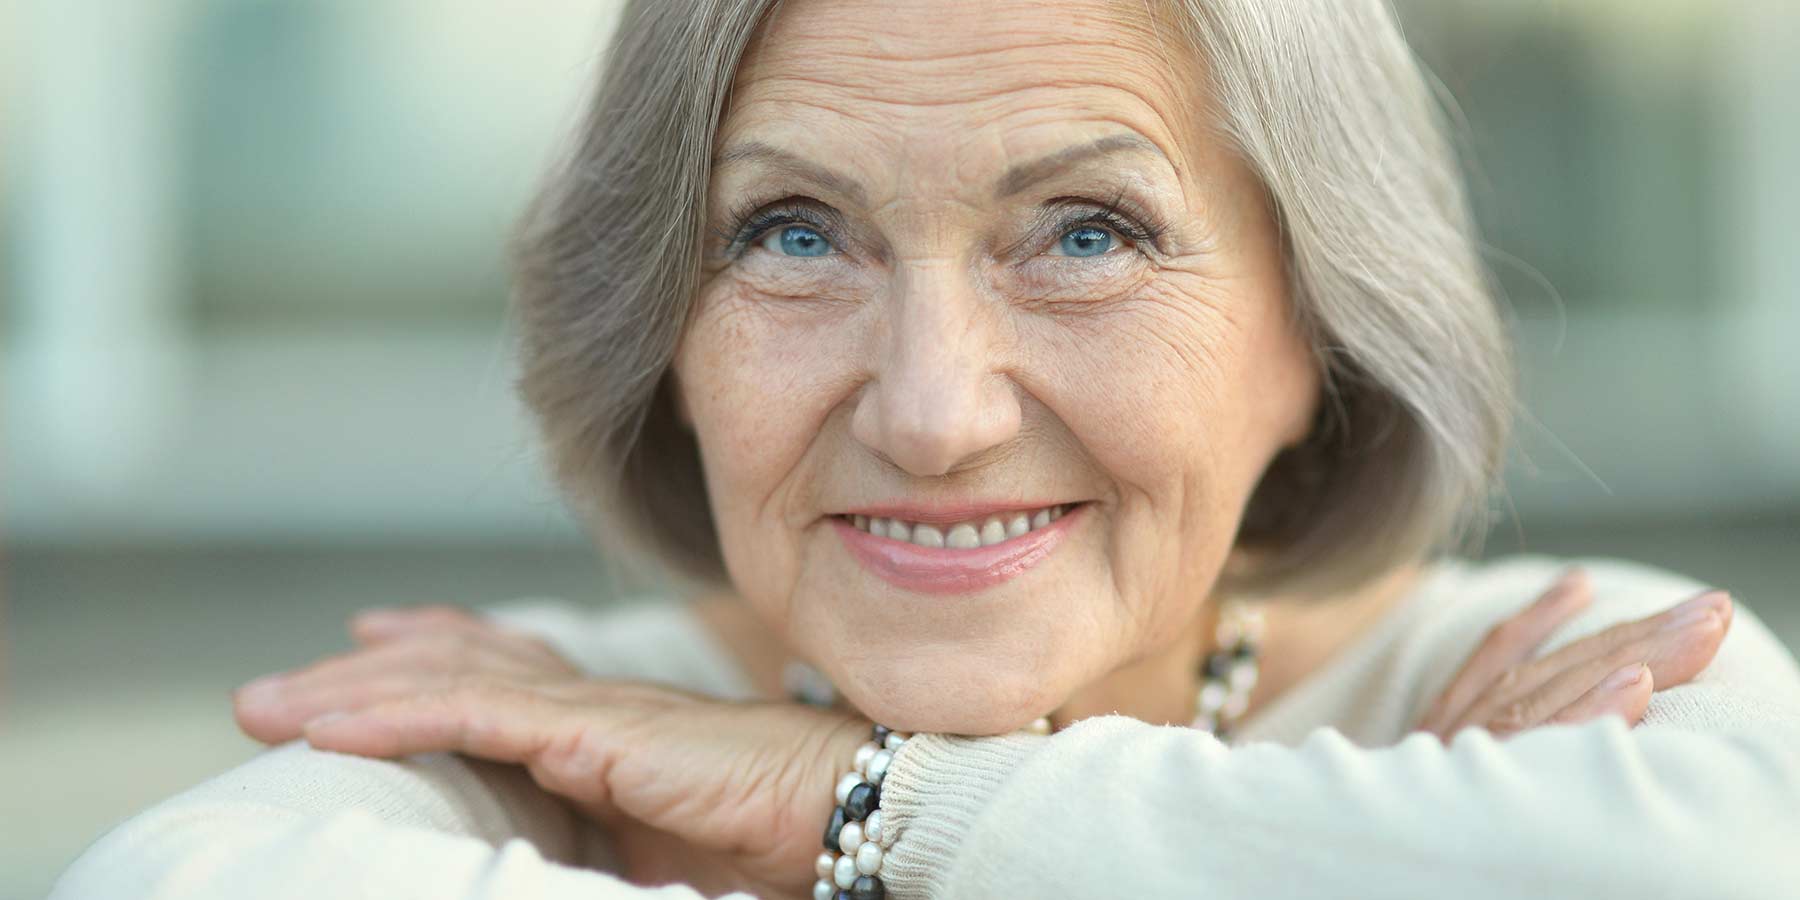 Mature Woman with Dentures